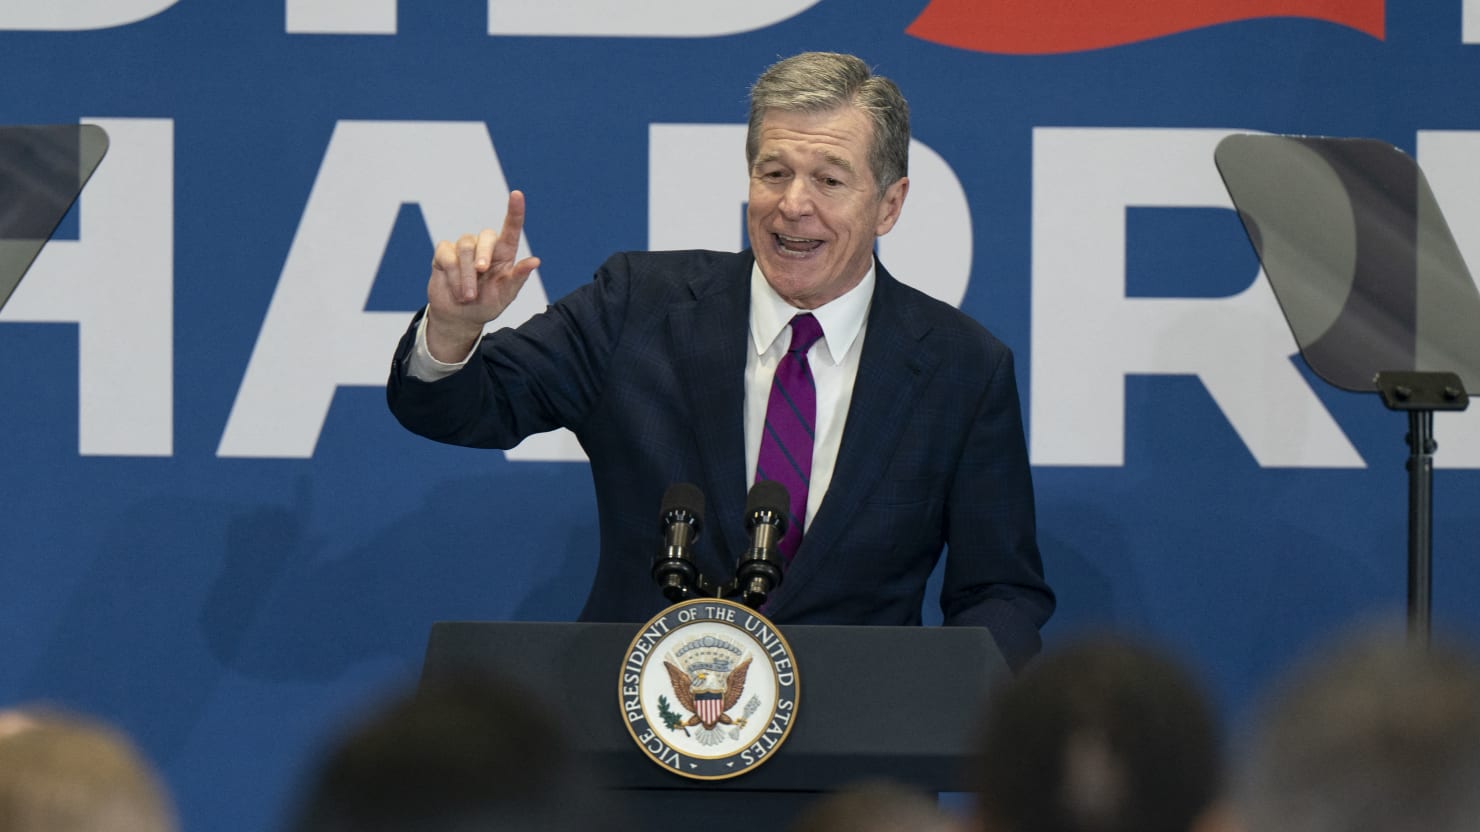 North Carolina Gov. Roy Cooper Drops Out of Harris’ Veepstakes